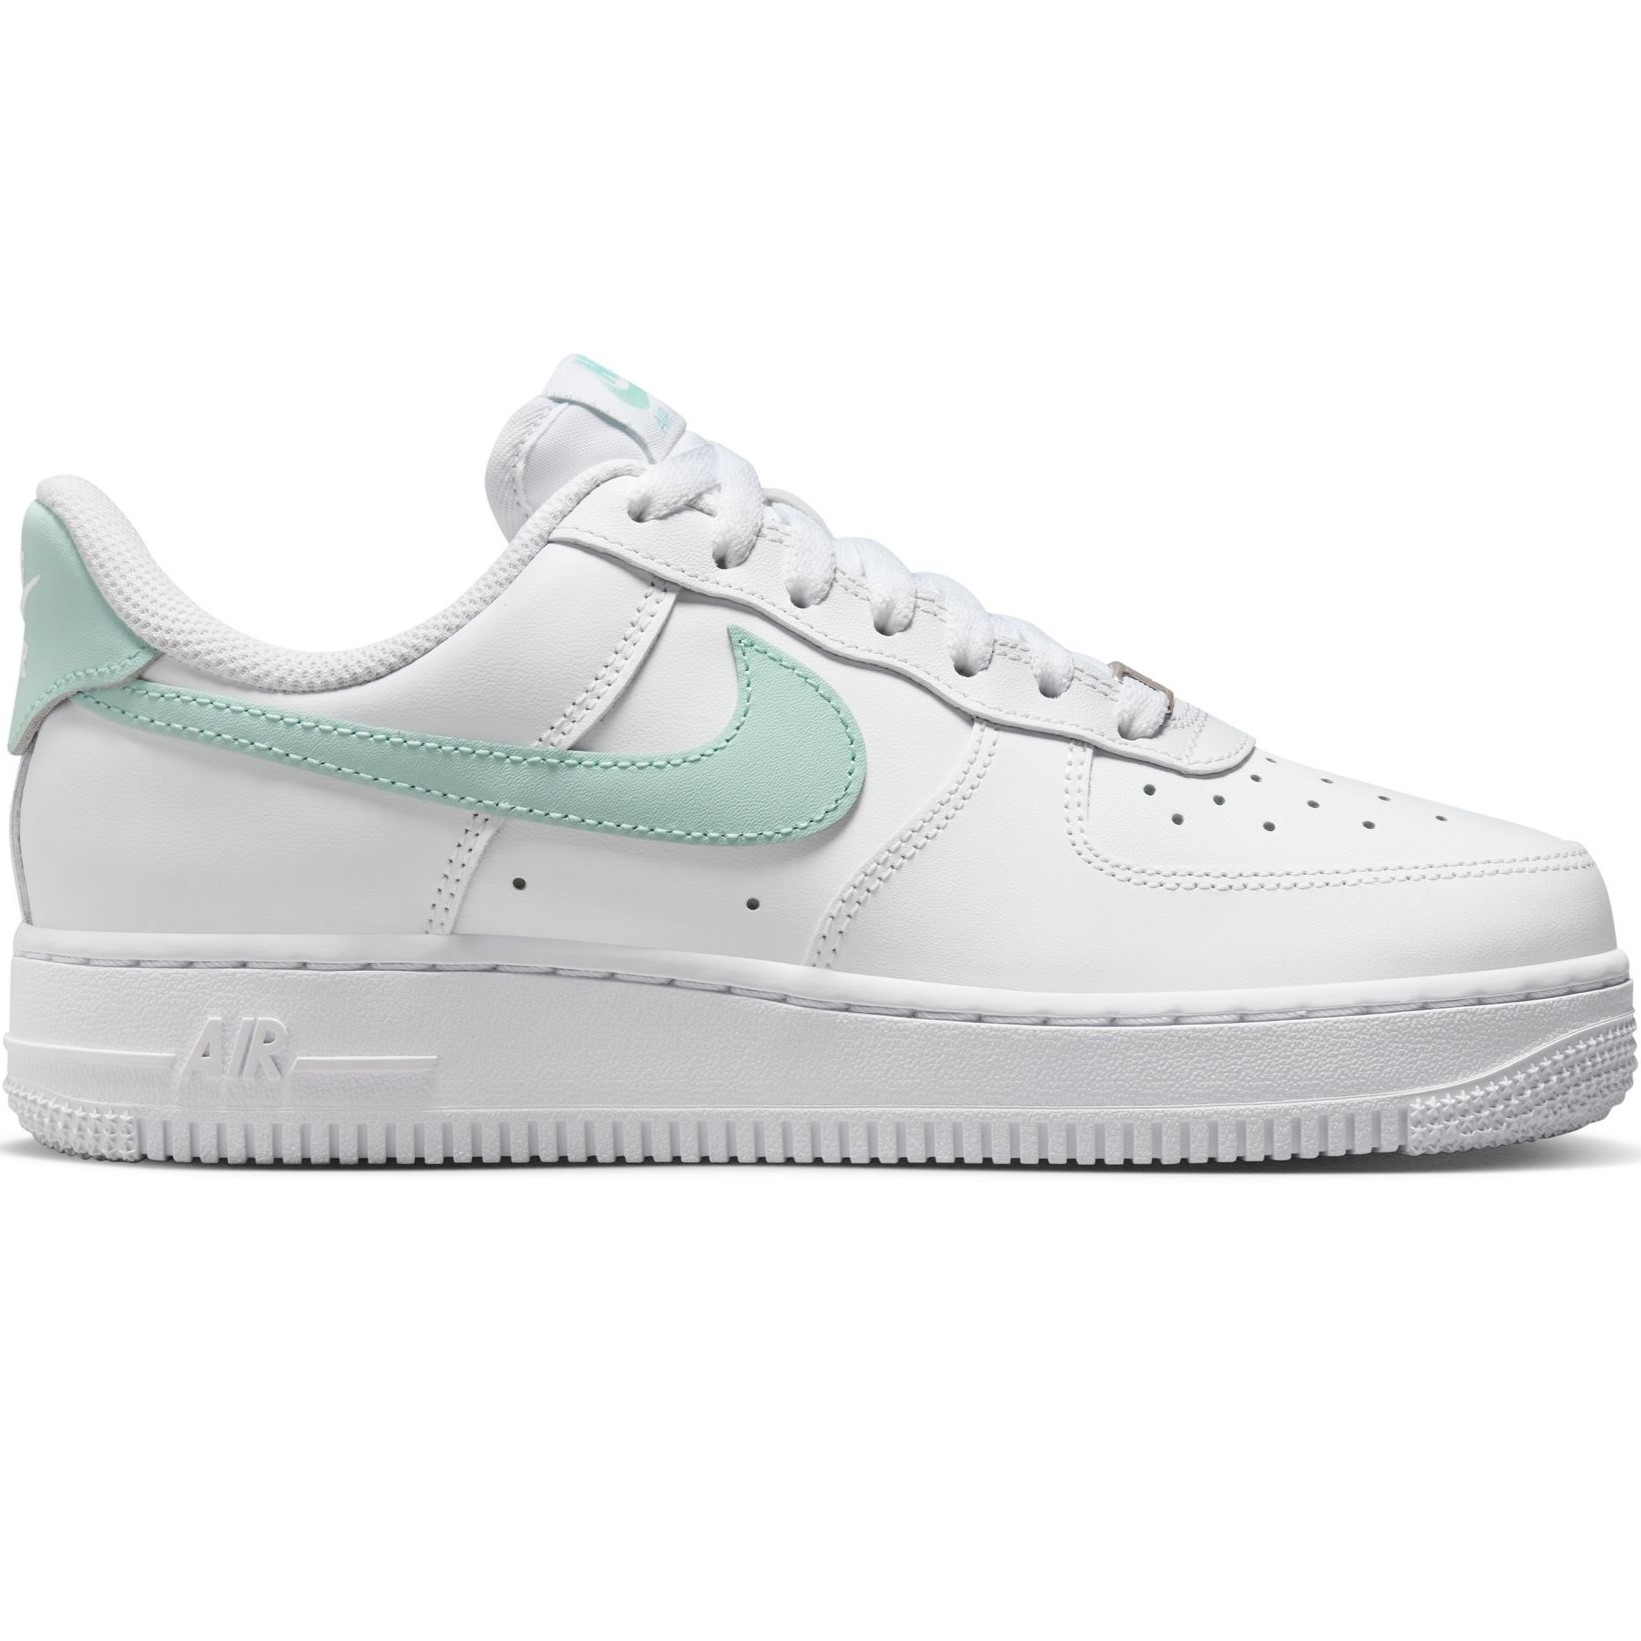 GIÀY THỂ THAO NIKE NỮ AIR FORCE 1 07 EASYON WHITE ICE JADE WOMENS SHOES DX5883-101 3